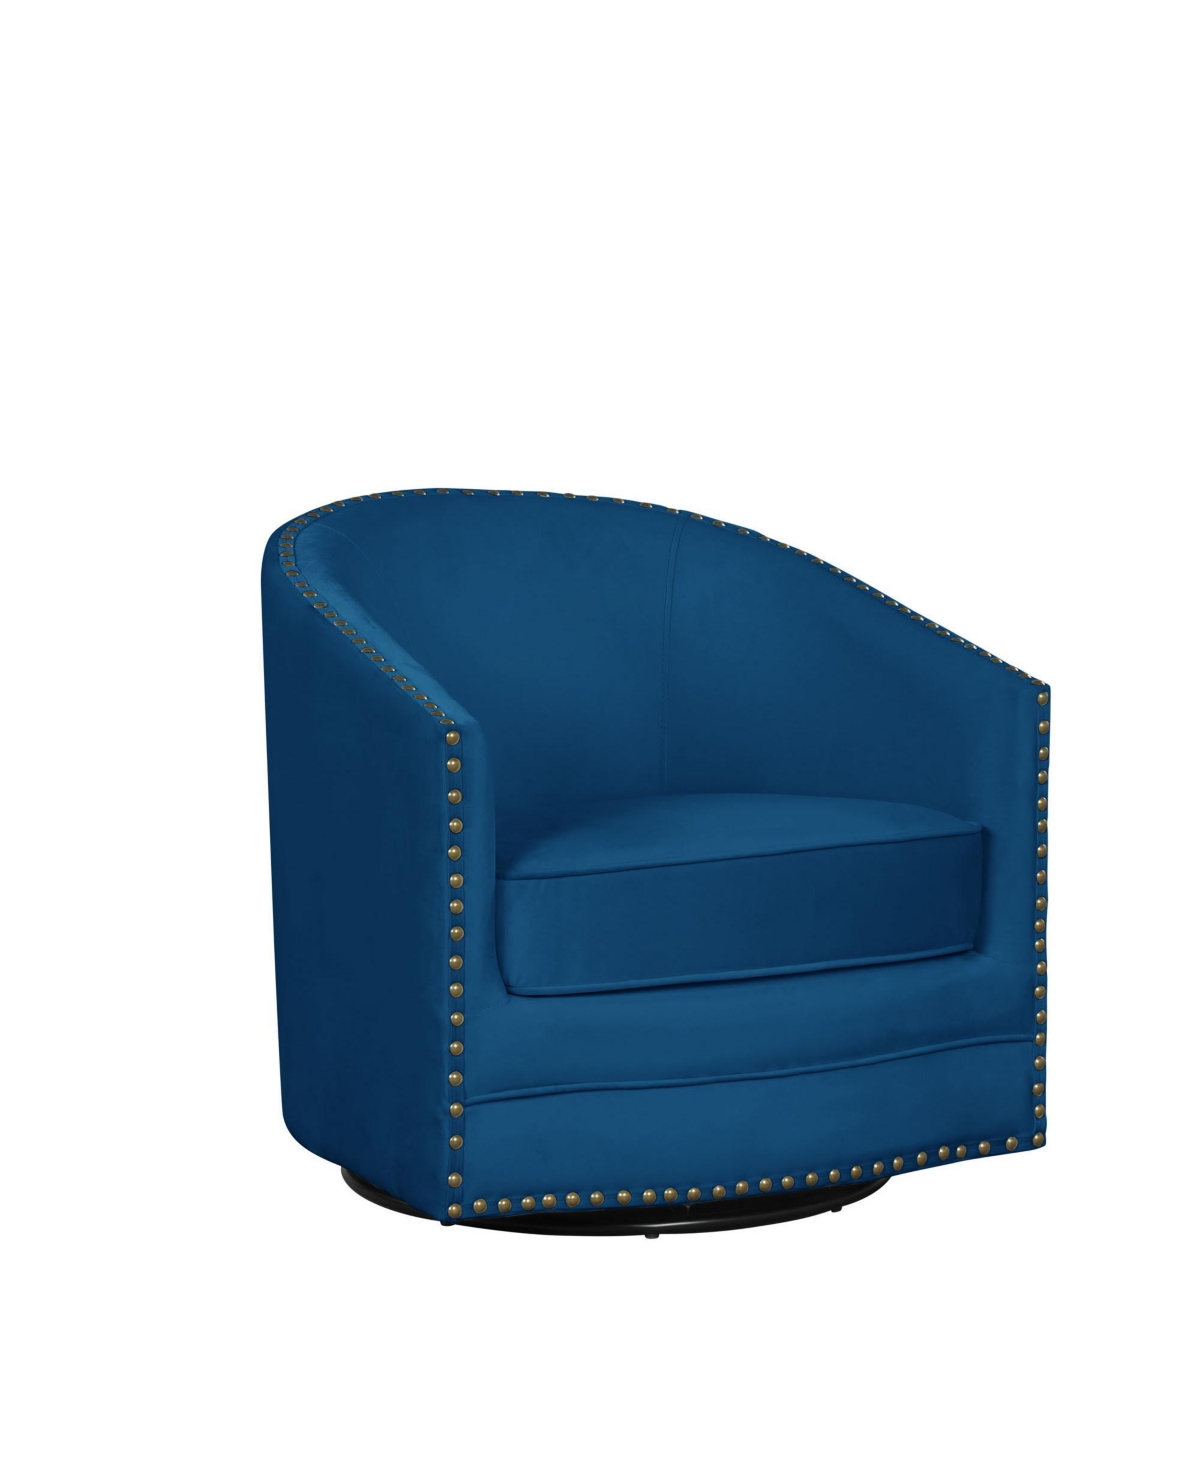 Lifestyle Solutions 28.5" Hailey Swivel Tub Chair In Navy